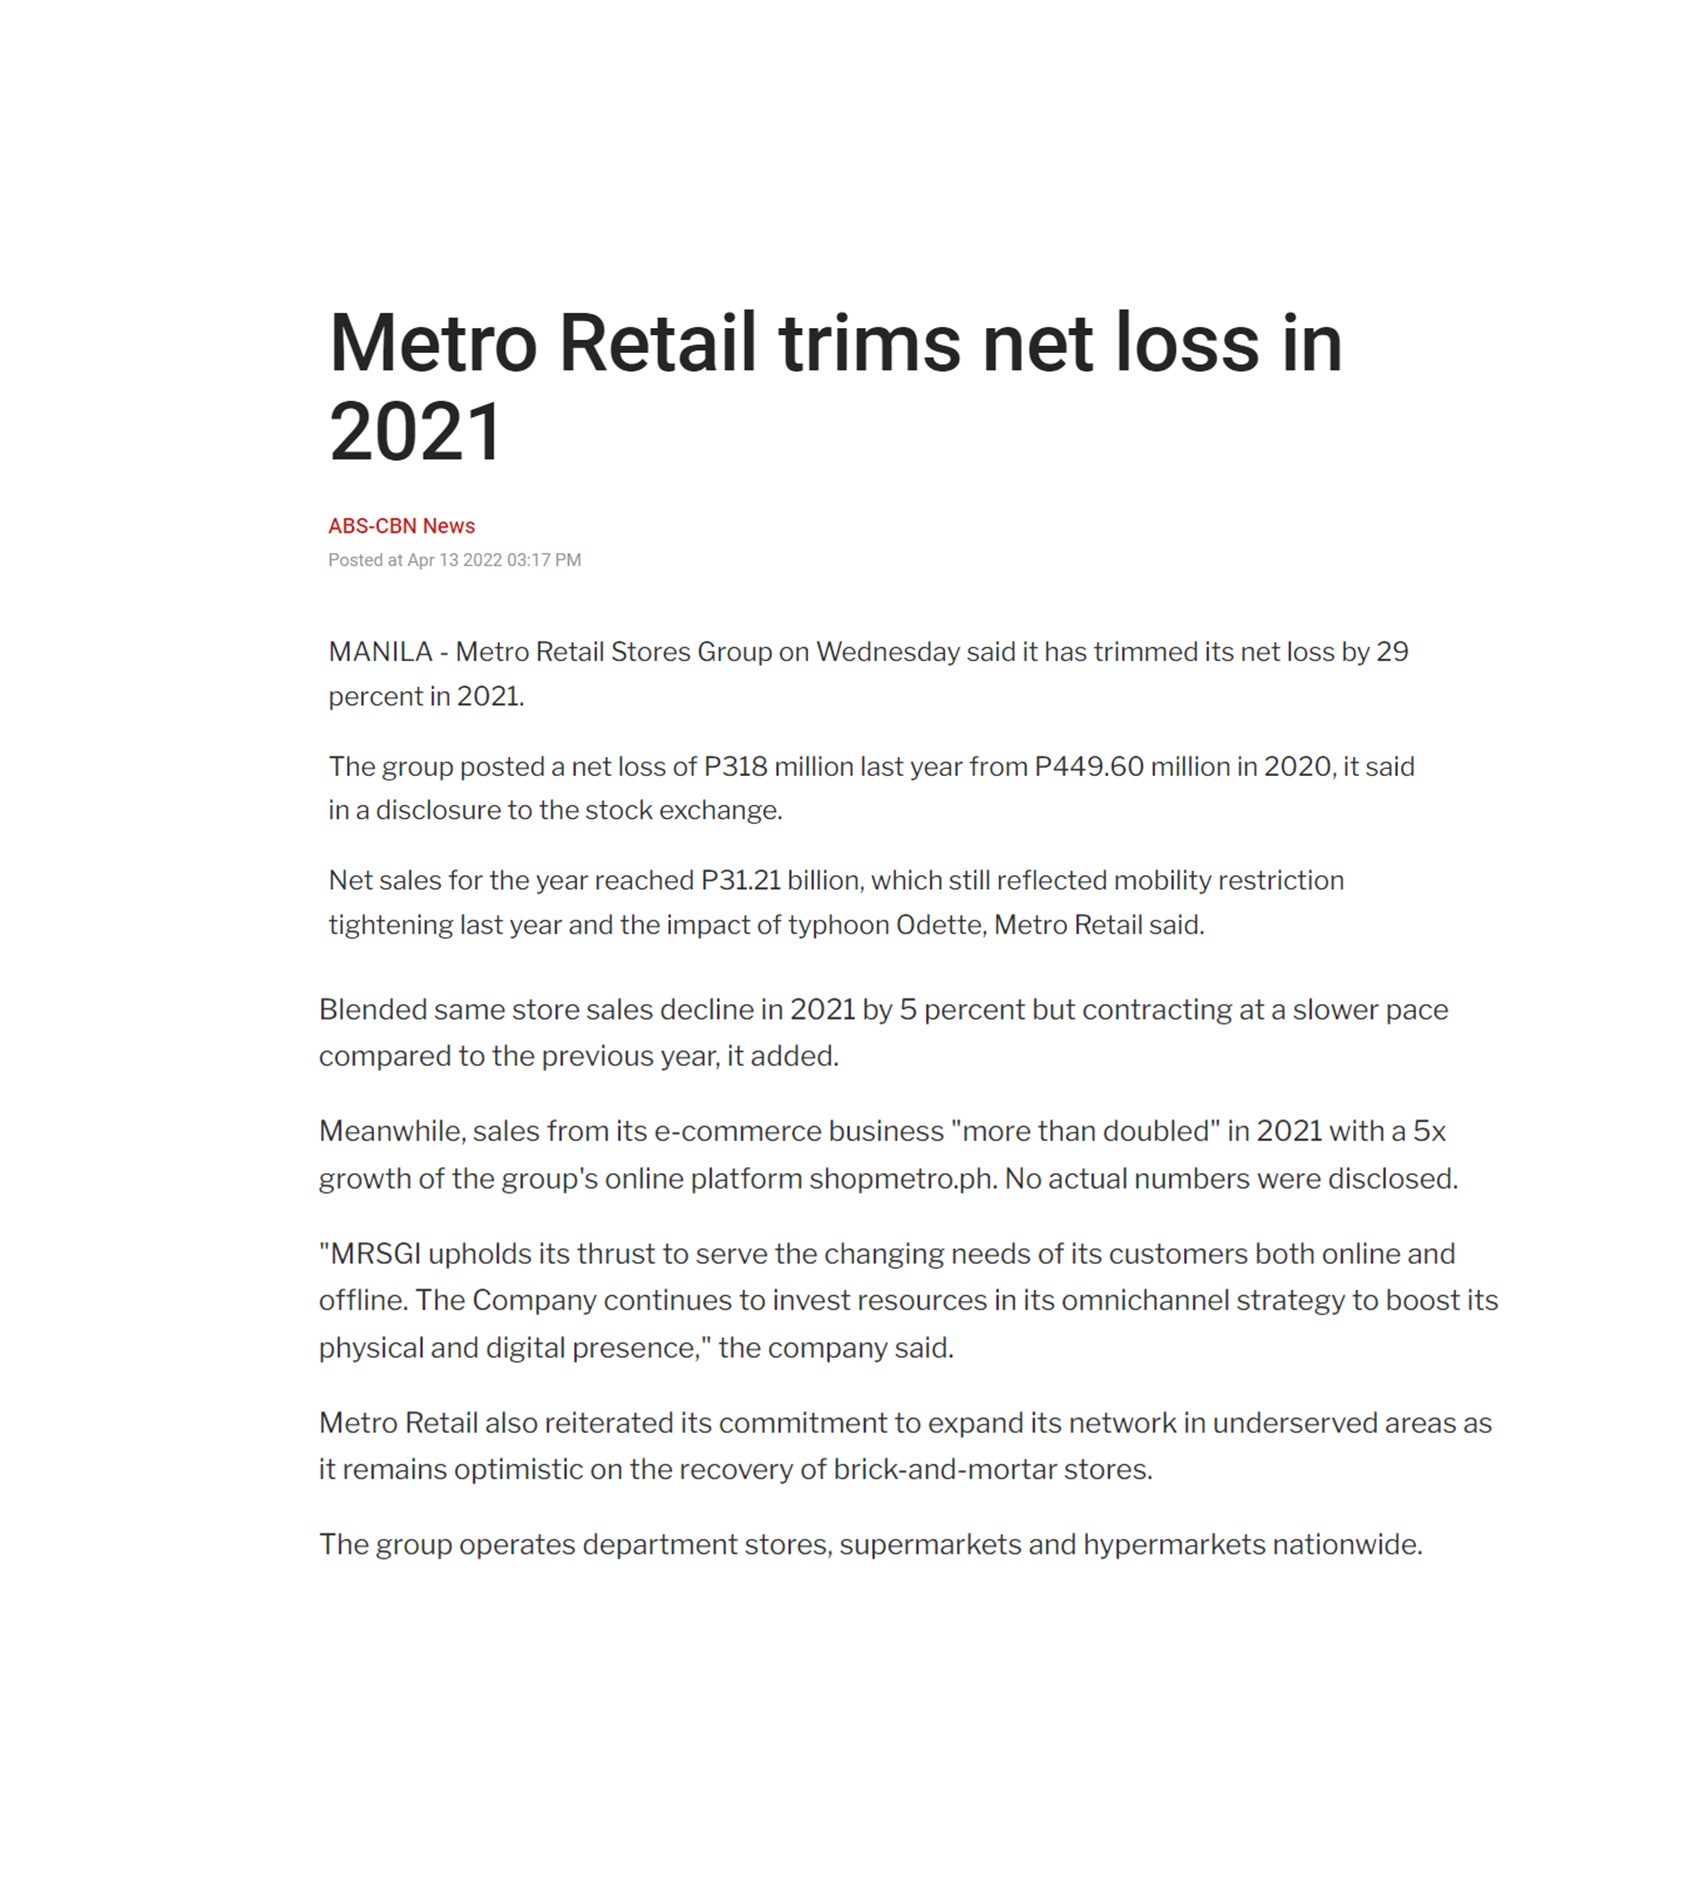 Metro Retail trims net loss in 2021 ABS CBN News